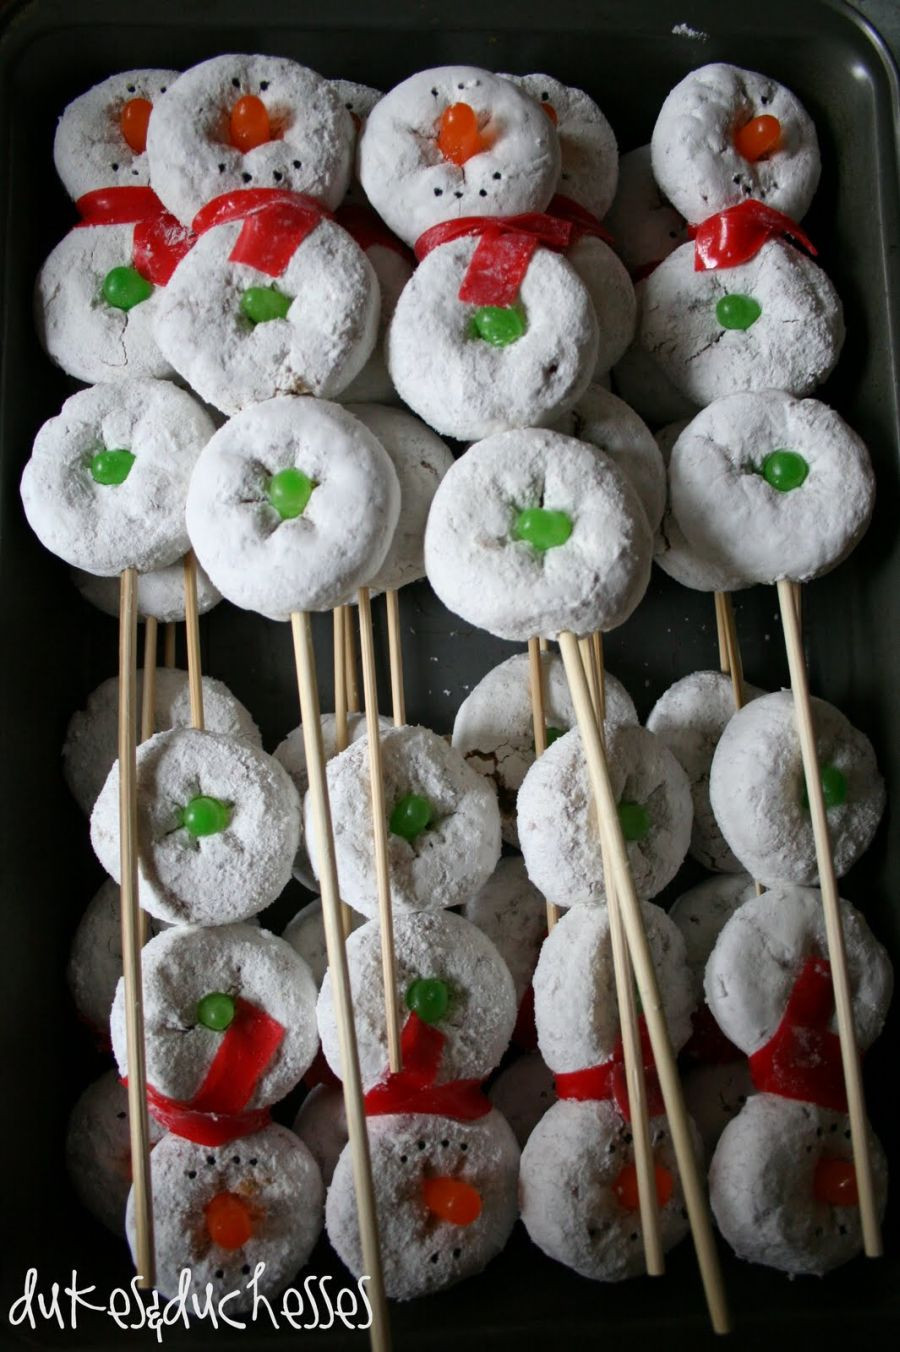 Small Christmas Party Ideas
 23 Christmas Party Decorations That Are Never Naughty